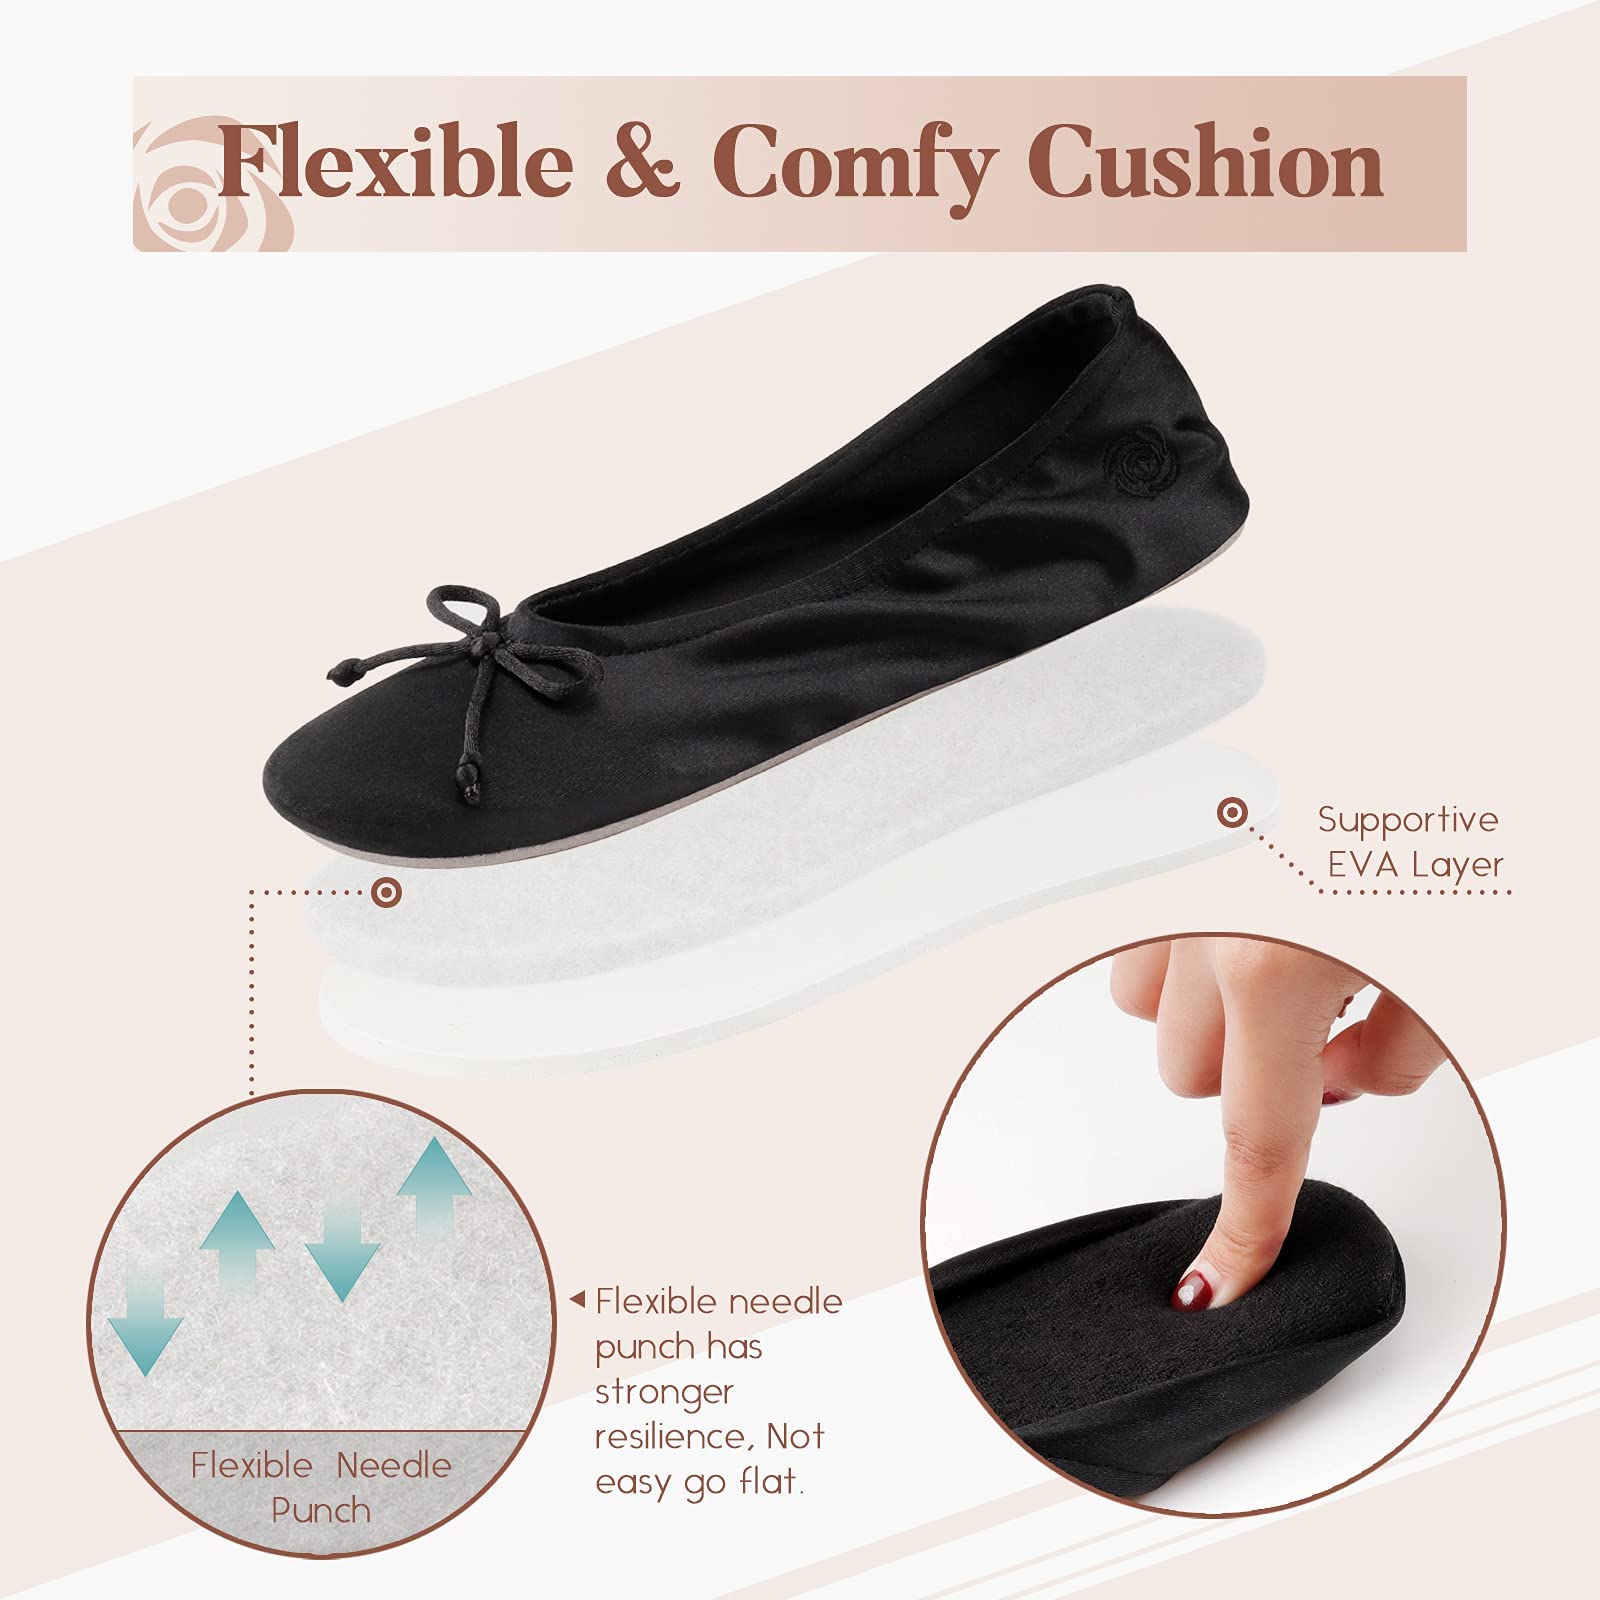 BCTEX COLL Women's Ballerina House Slippers with Bow, Ladies Satin Bedroom Slipper with Suede Sole Indoor